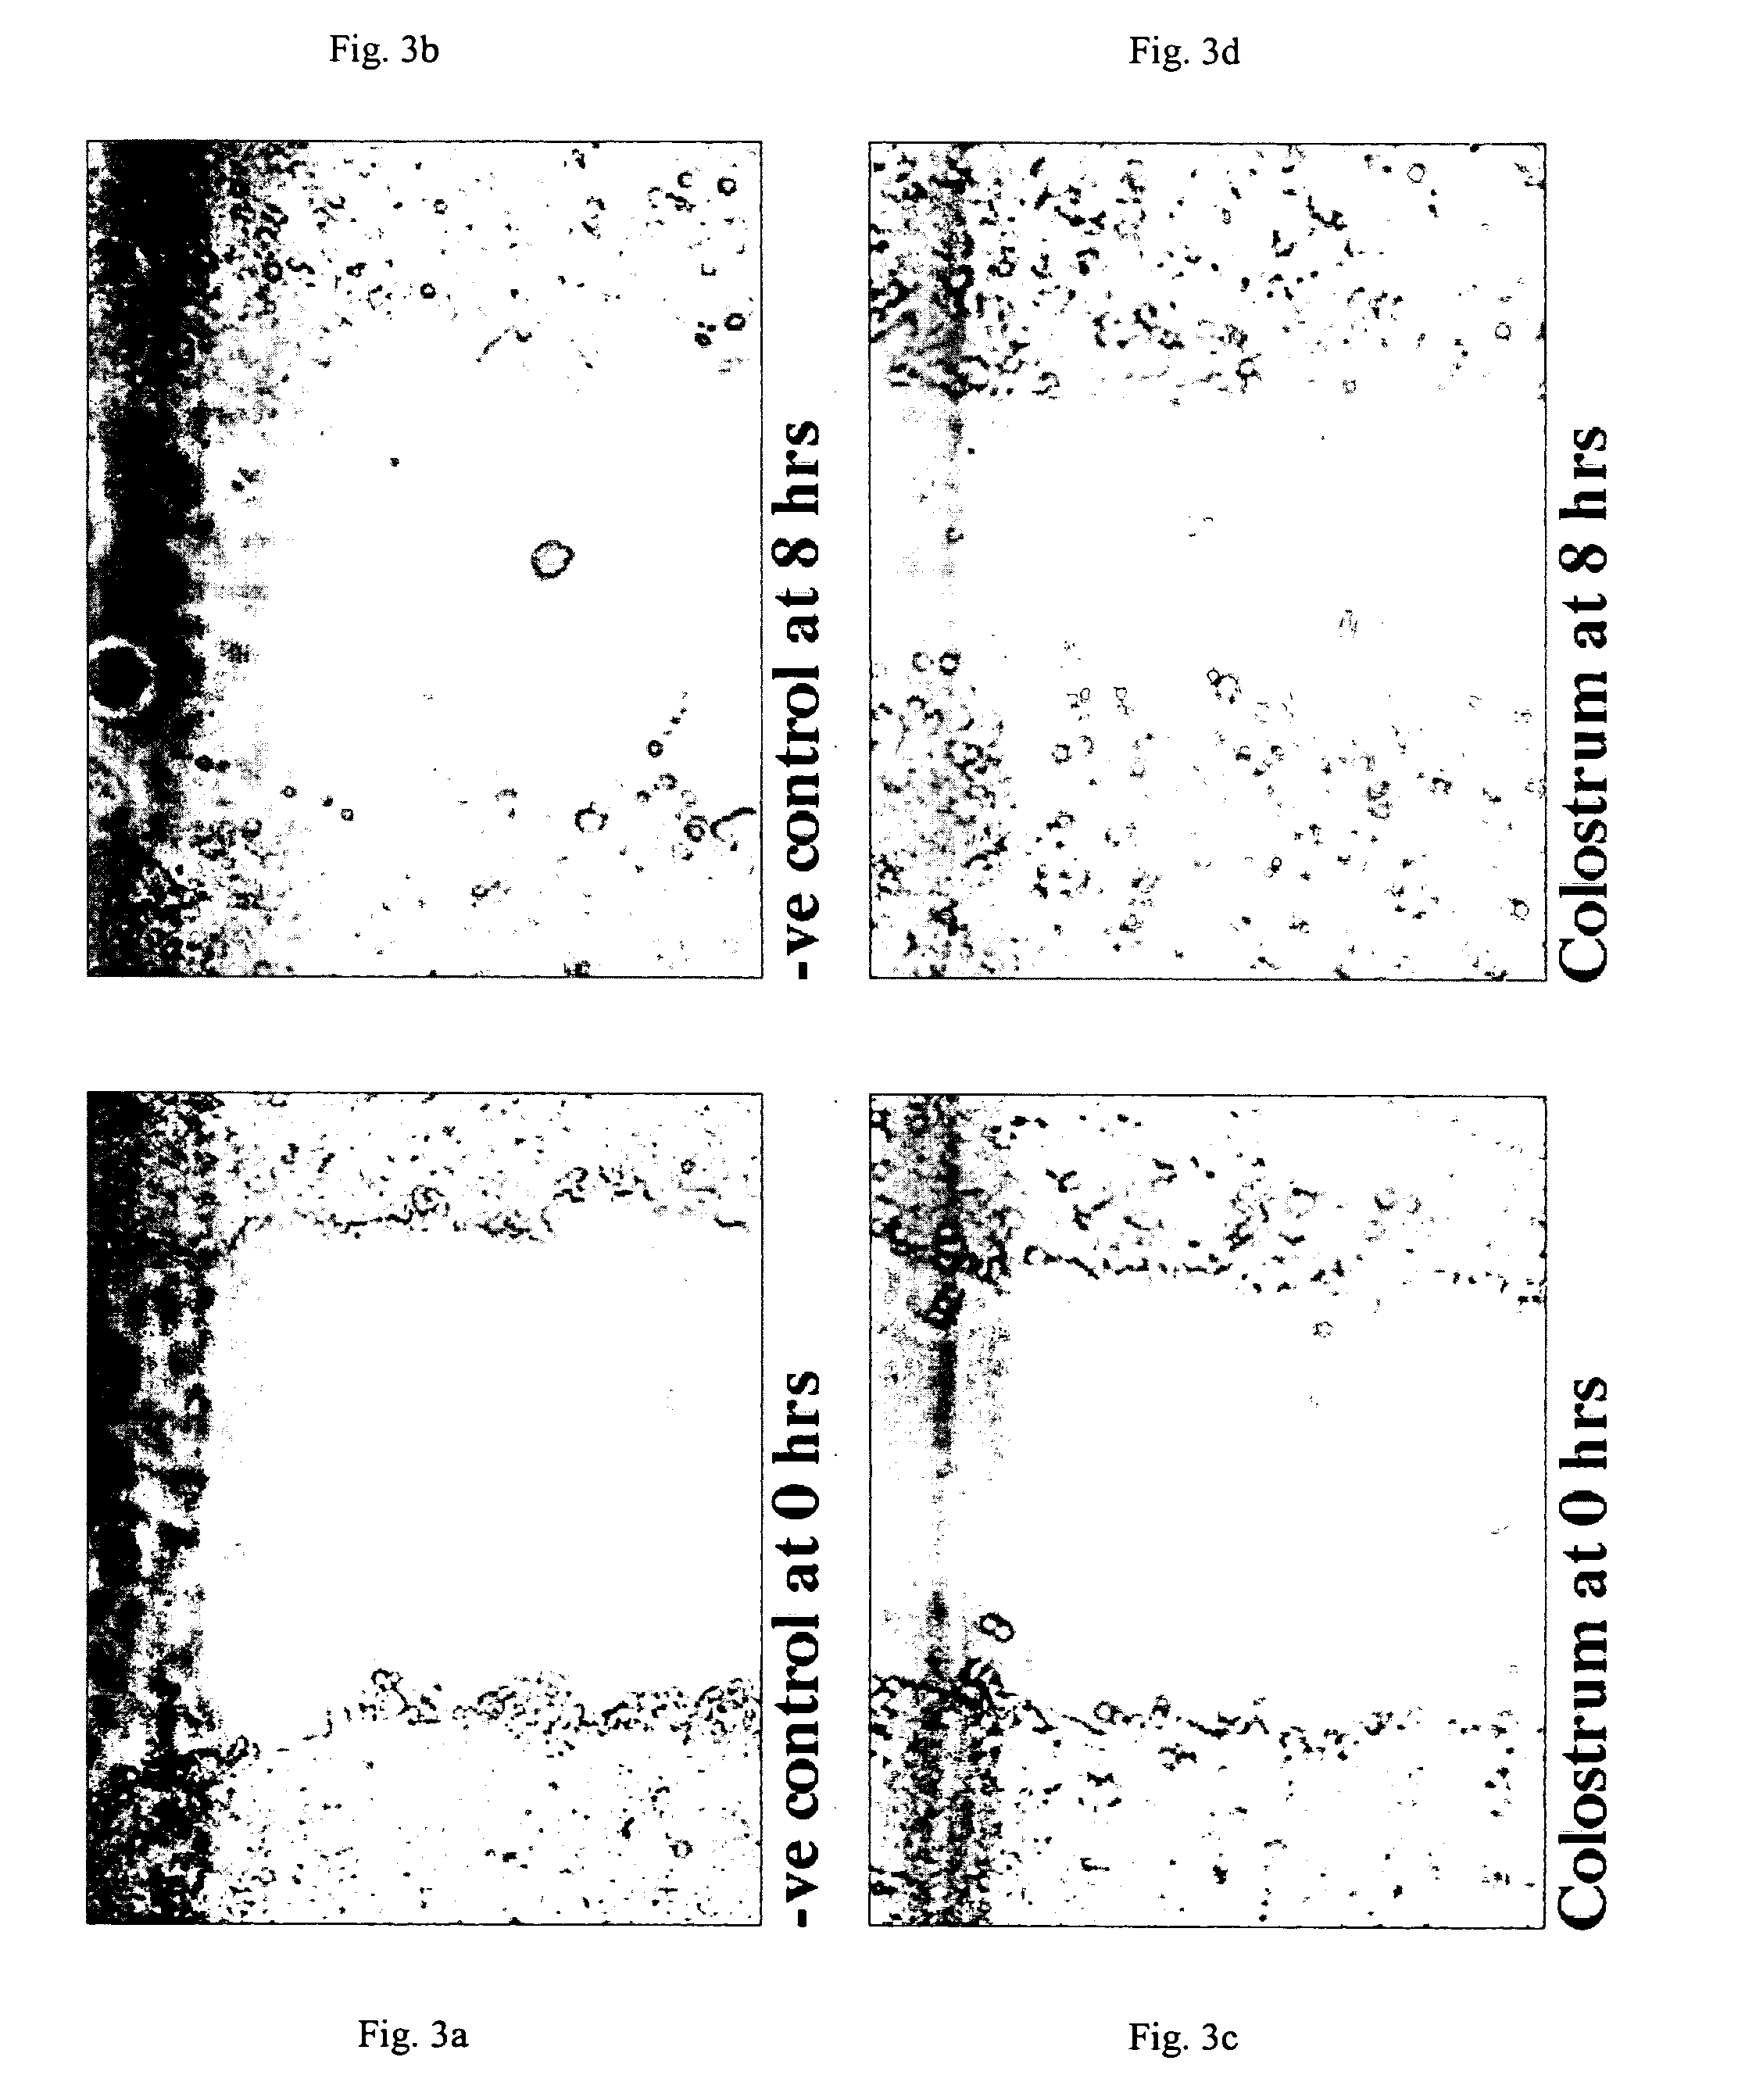 Repair and protection factor scoring method for bioactive agents